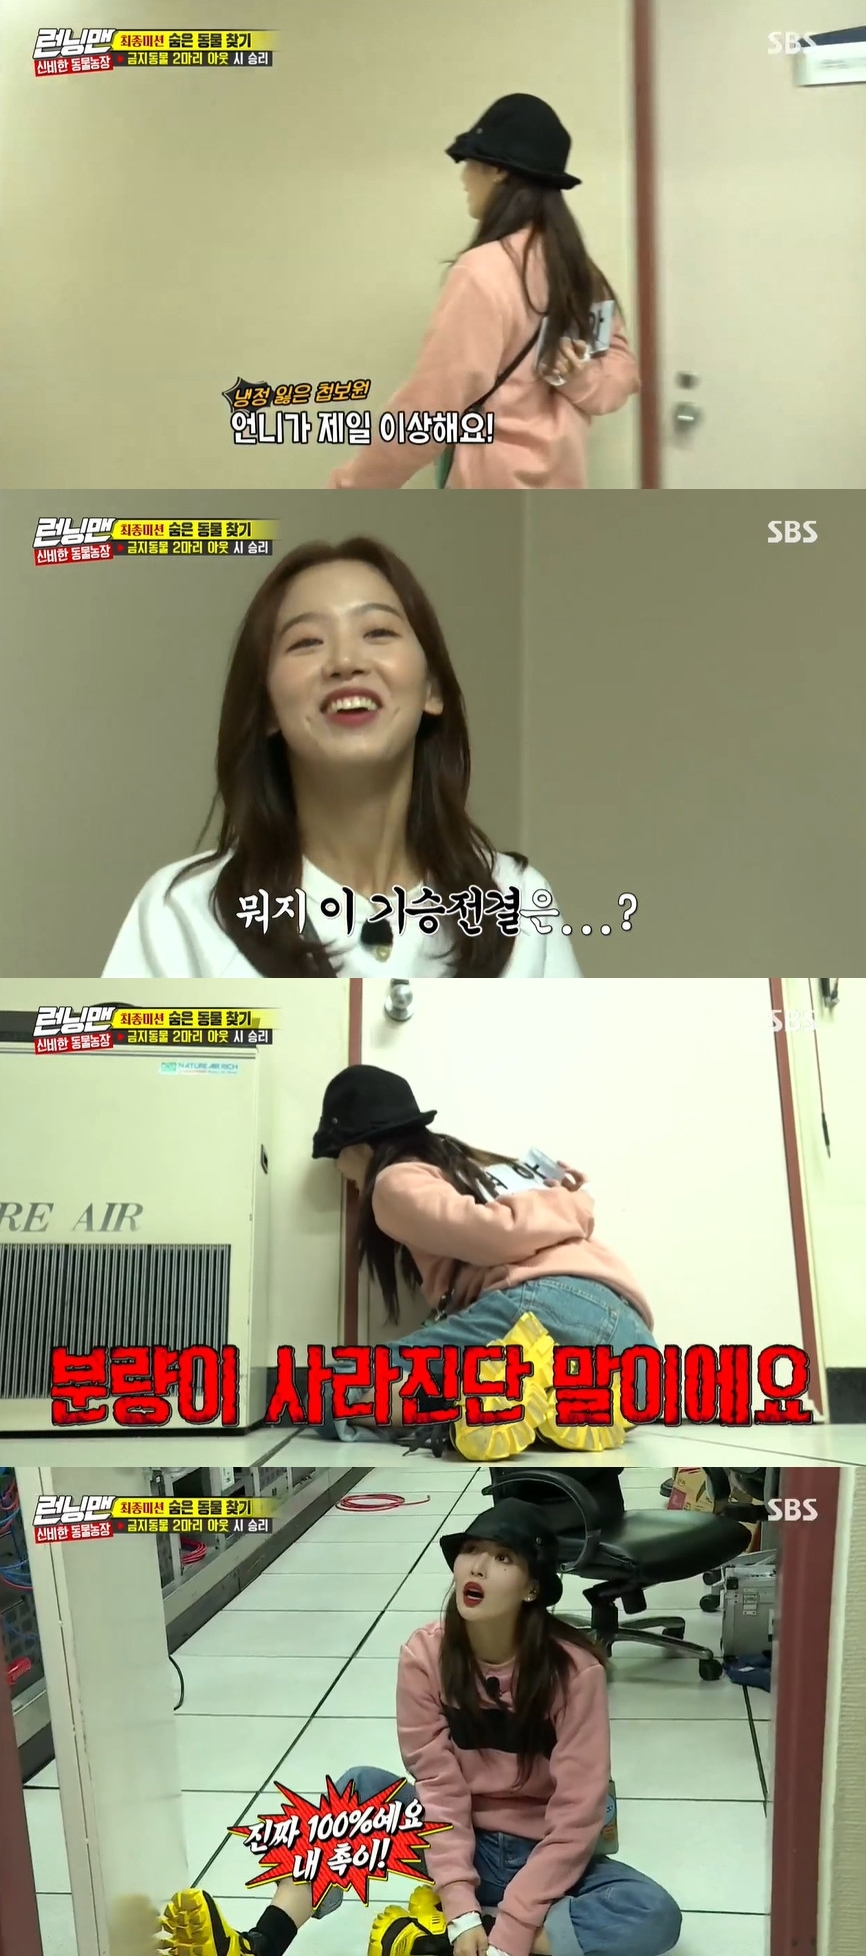 Seoul) = Hyuna has launched an extraordinary spy war to find hidden banned animals.On SBS Running Man broadcasted at 5 pm on the 17th, it was featured as The Secret of Forbidden Animals.On the day, members and guests went looking for two hidden banned animals: Kang Han-Na and Haha chased Hyuna, and Hyuna said, Kang Han-Na is the culprit.I drove it into the opener. Be careful of your brother. Then I die. Kang Han-Na left, and only Lee Kwang-soo and Haha remained. Hyuna opened the door and said, If this is torn, the amount will disappear.What do you talk about with the two fools? Meanwhile, Running Man is broadcast every Sunday at 5 pm.